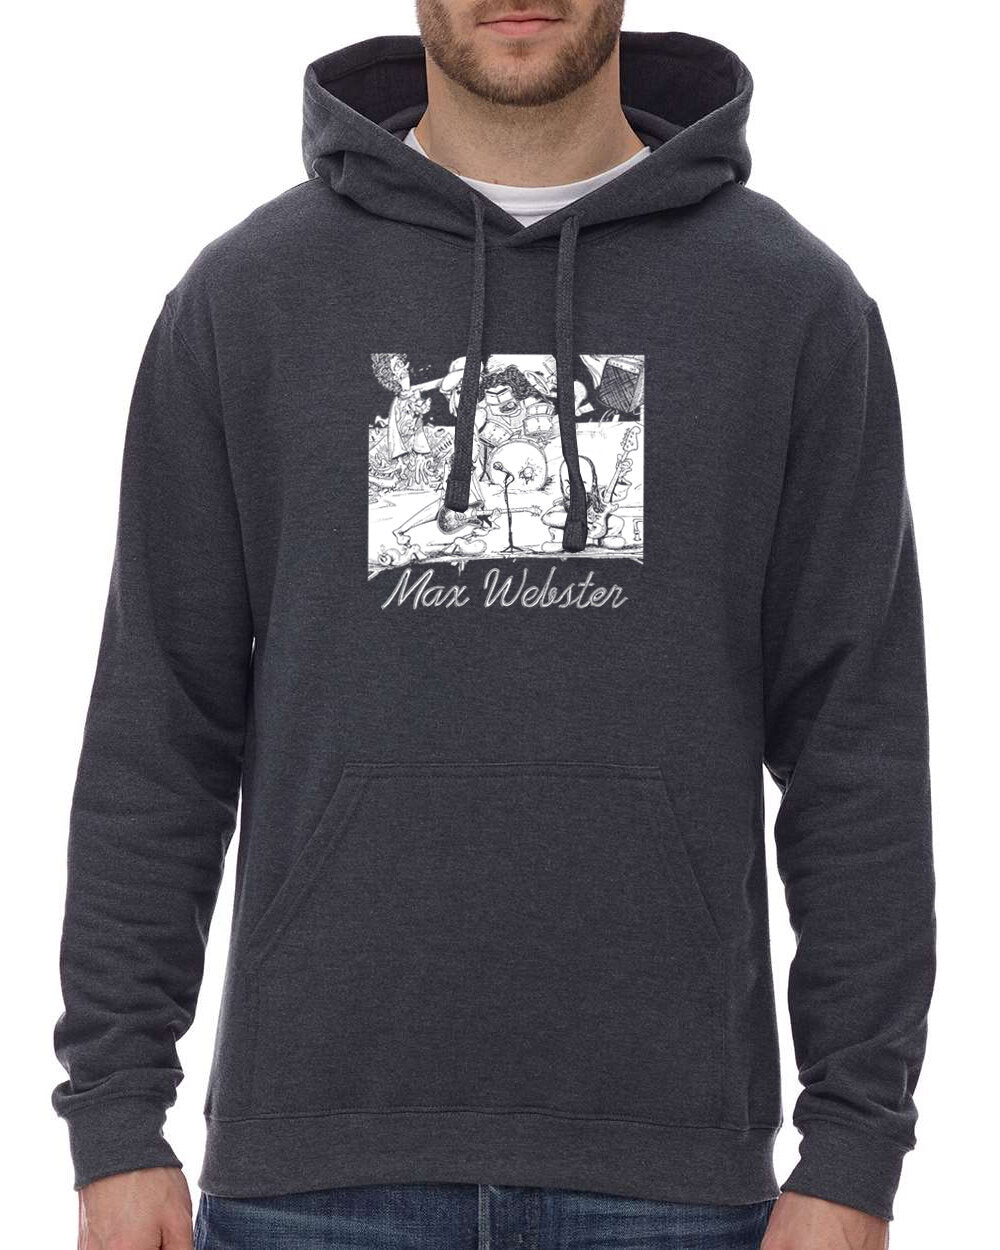 Max Webster Drawing Hoodie *NEW* (2 colours)